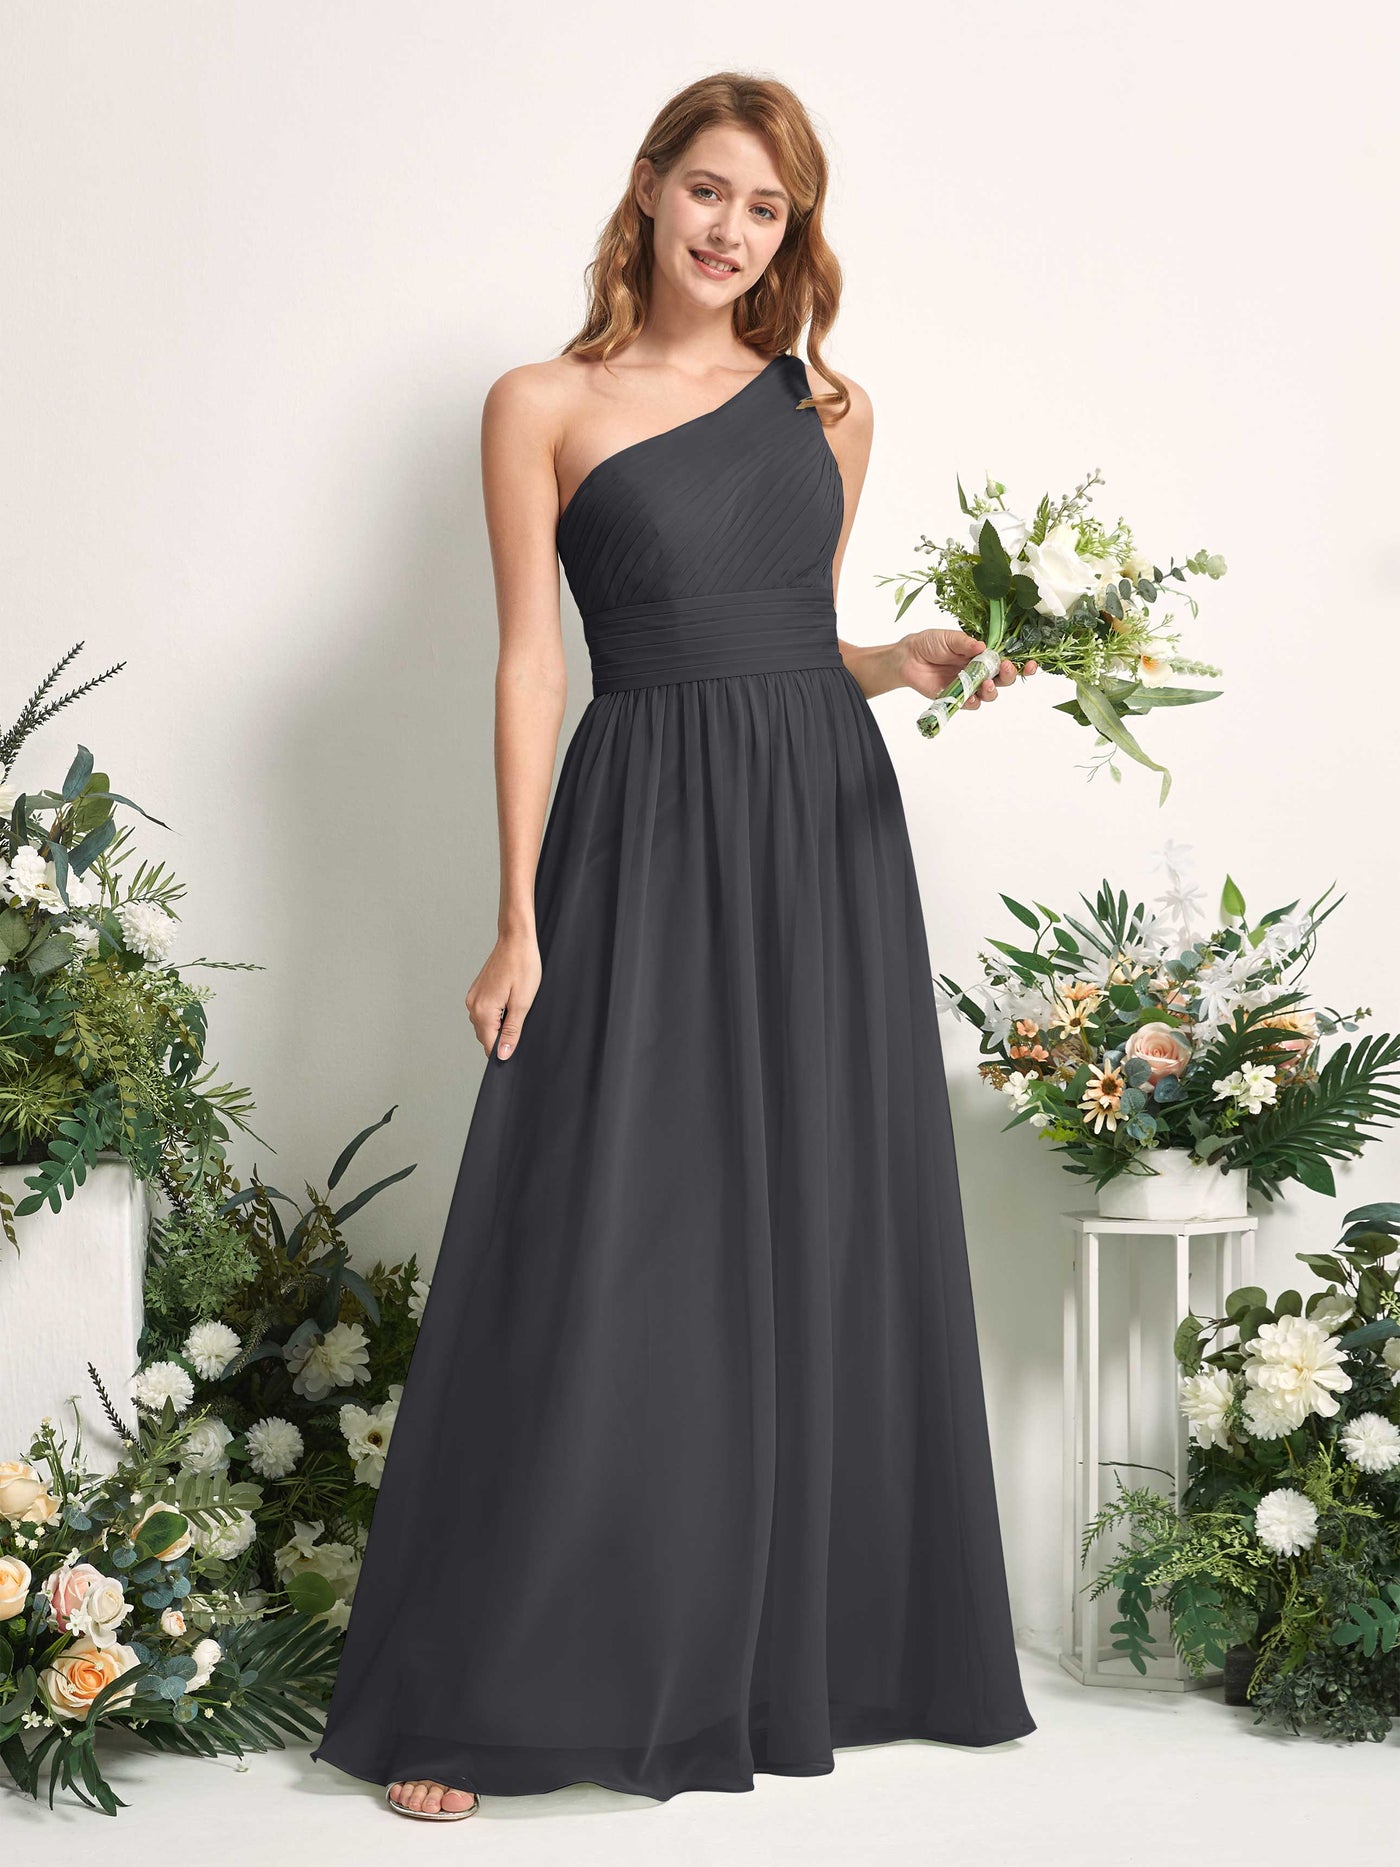 Bridesmaid Dress A-line Chiffon One Shoulder Full Length Sleeveless Wedding Party Dress - Pewter (81226738)#color_pewter